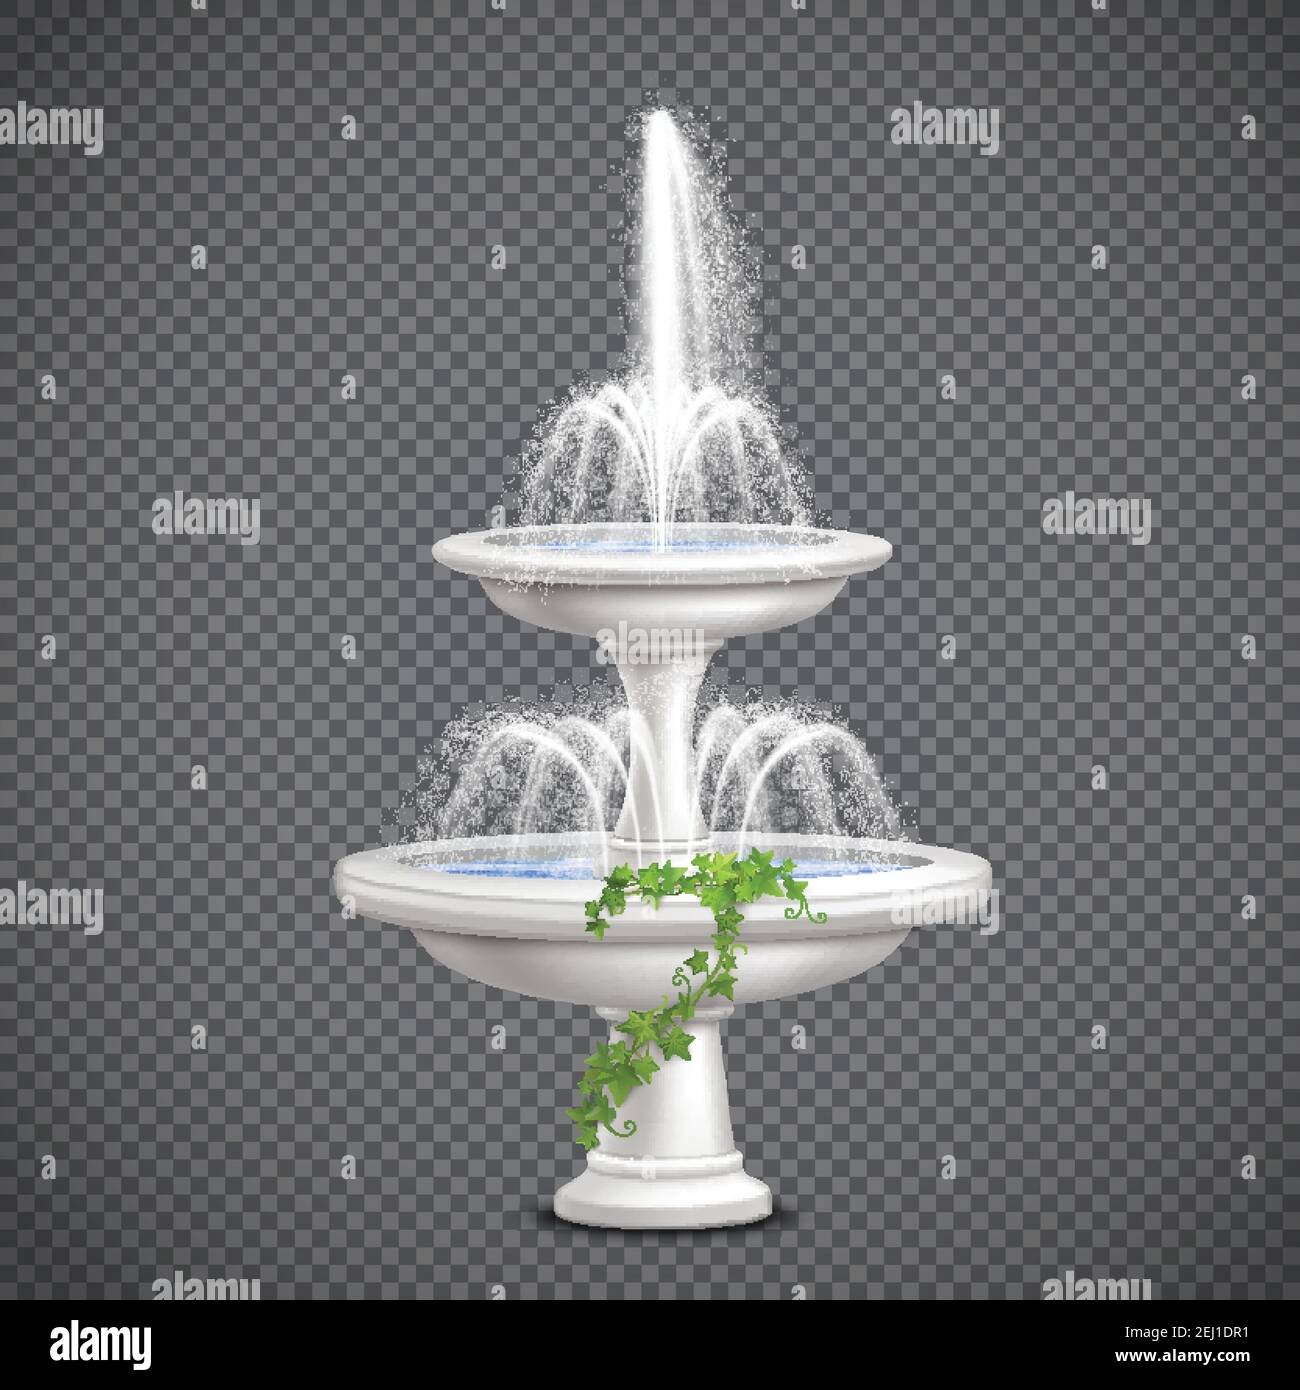 Two tier white cascade water fountain with climbing ivy plant realistic image on transparent background vector illustration Stock Vector